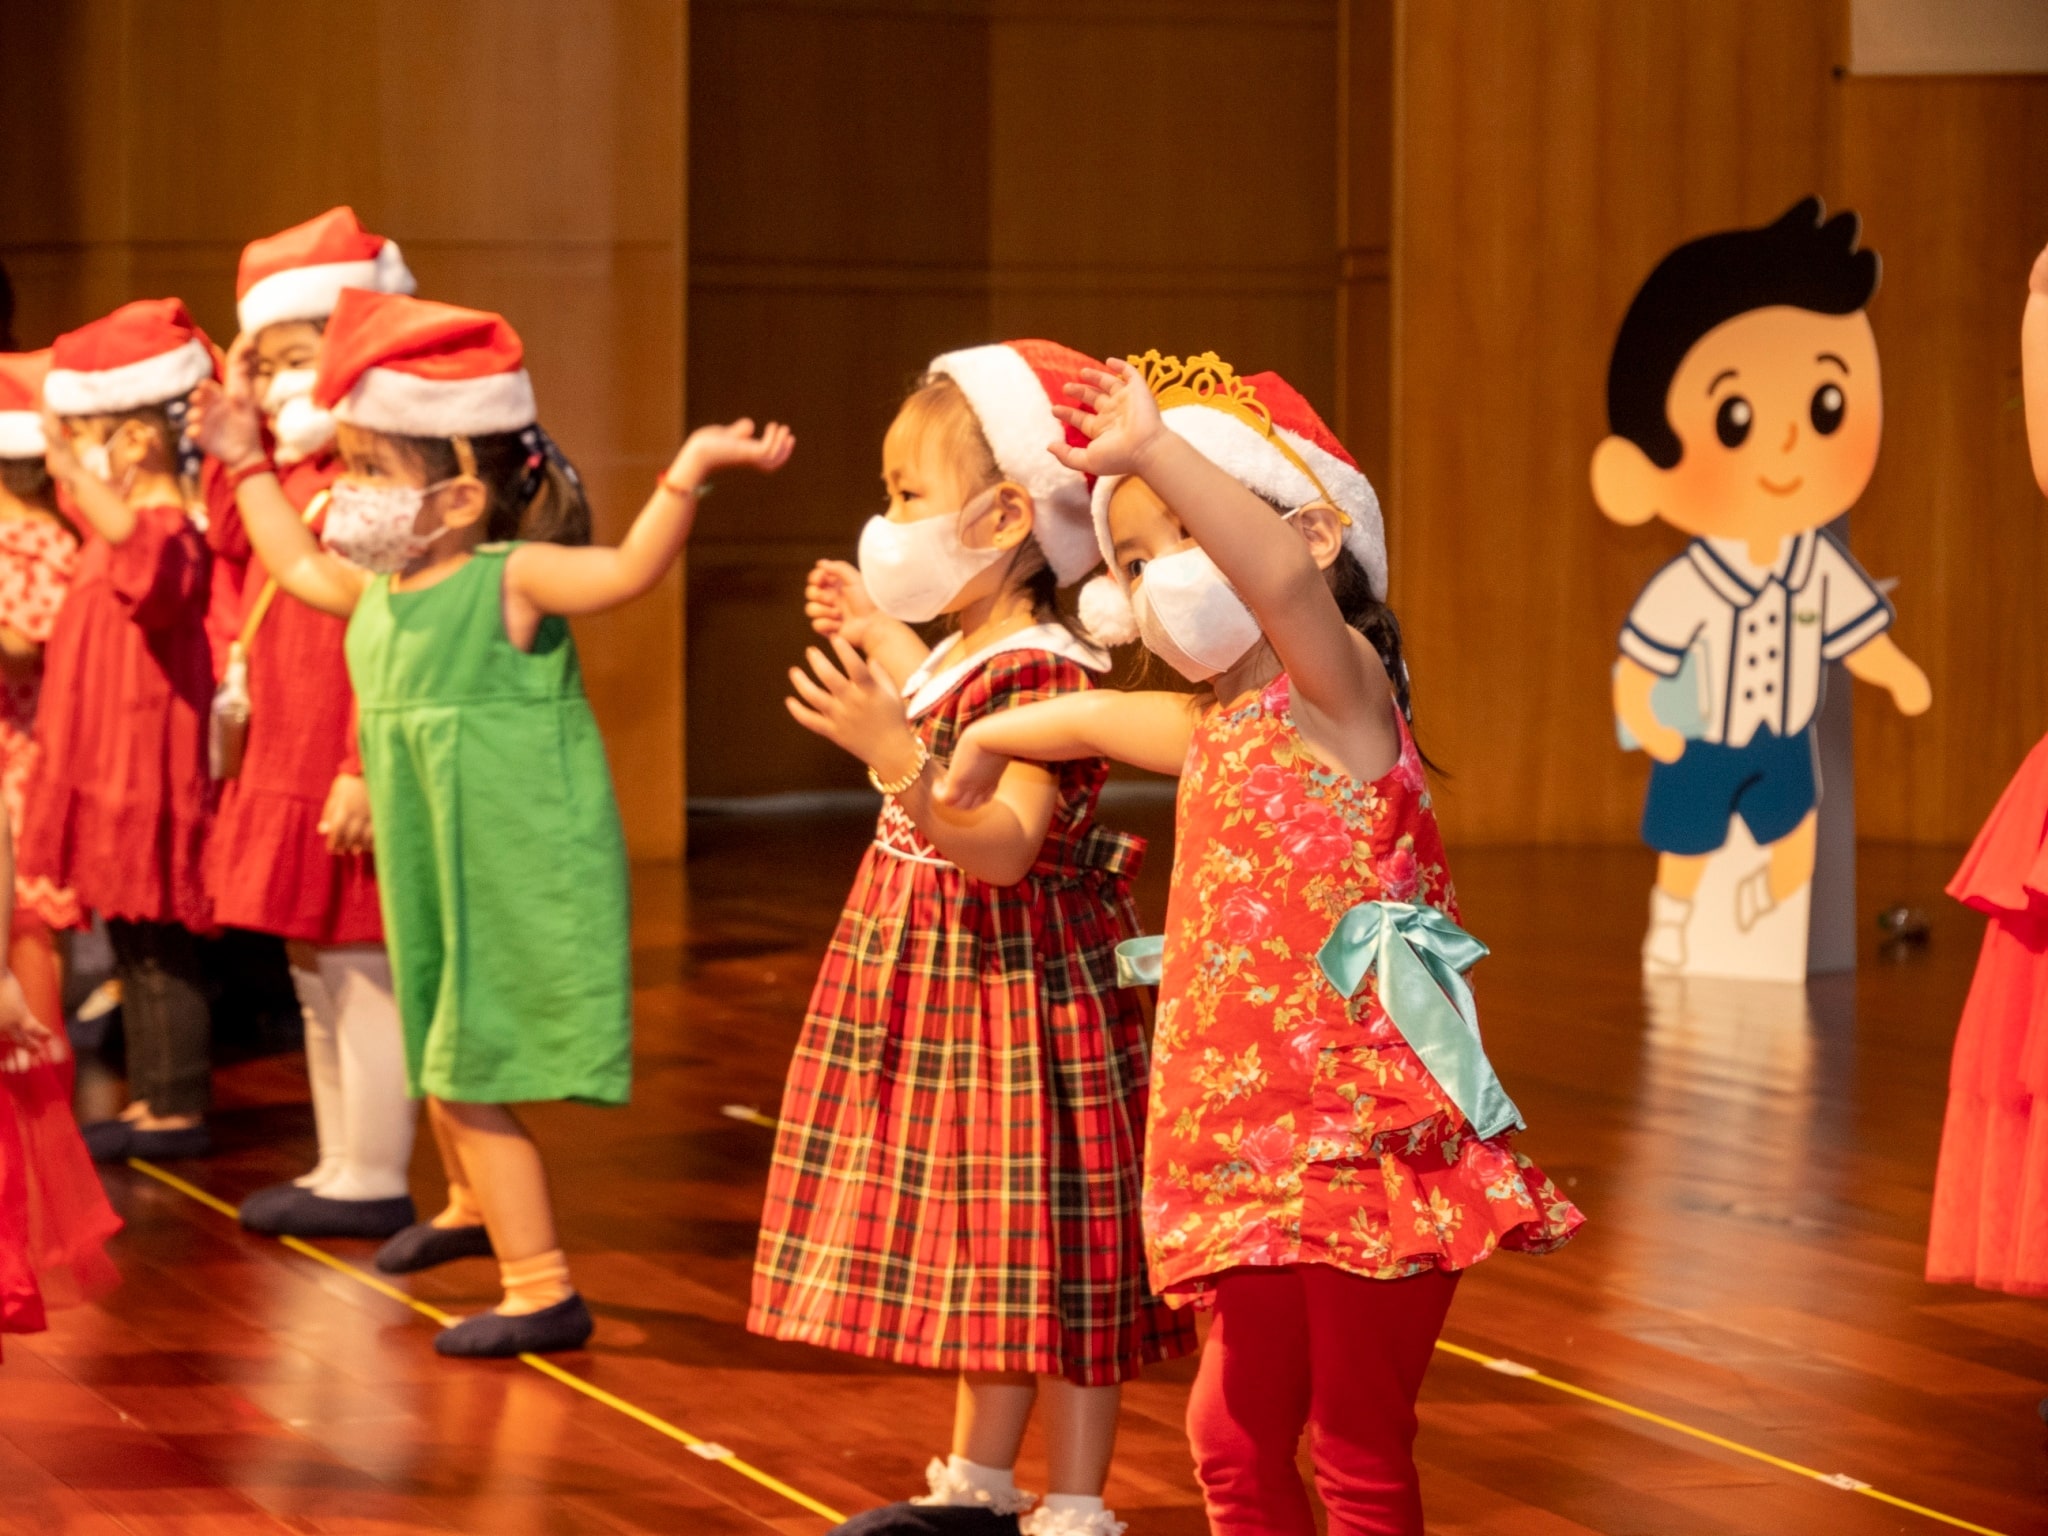 Preschool students showcase their talents in song and dance performances. 【Photo by Harold Alzaga】